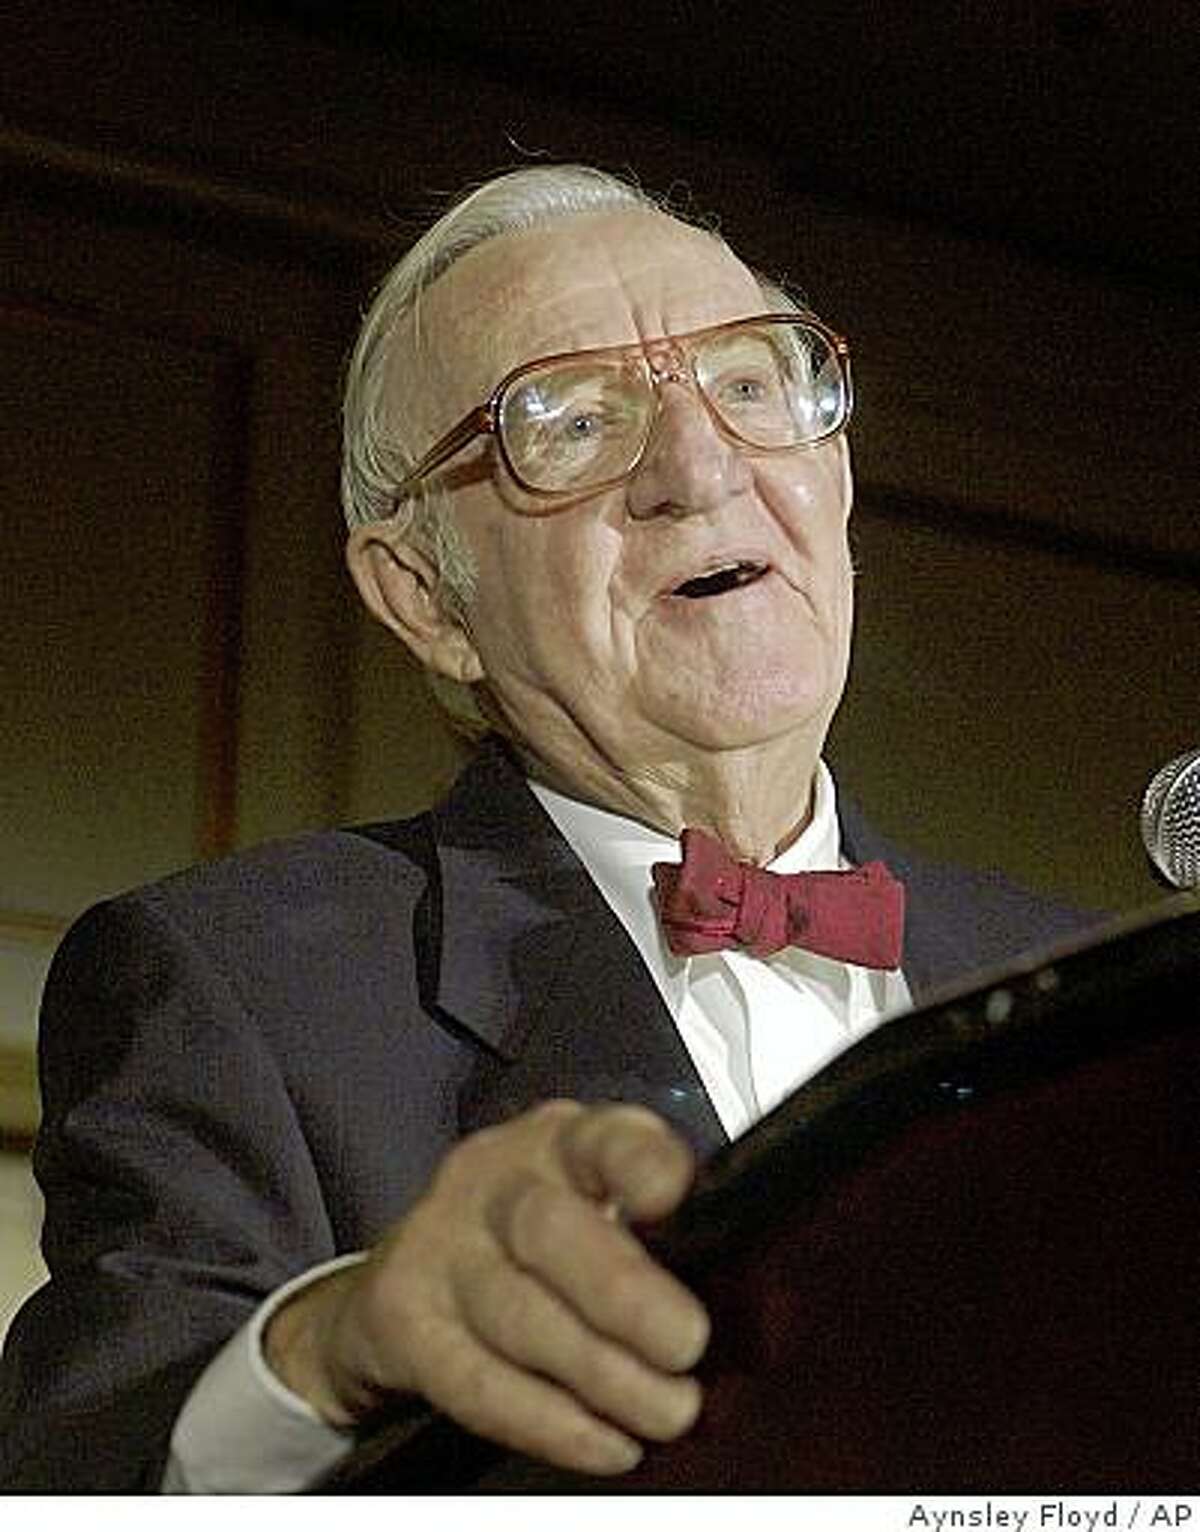 .S. Supreme Court Justice John Paul Stevens delivers the keynote address at the American Bar Association's 2005 Thurgood Marshall Awards Dinner in Chicago on Saturday, Aug. 6, 2005. (AP Photo/Aynsley Floyd)